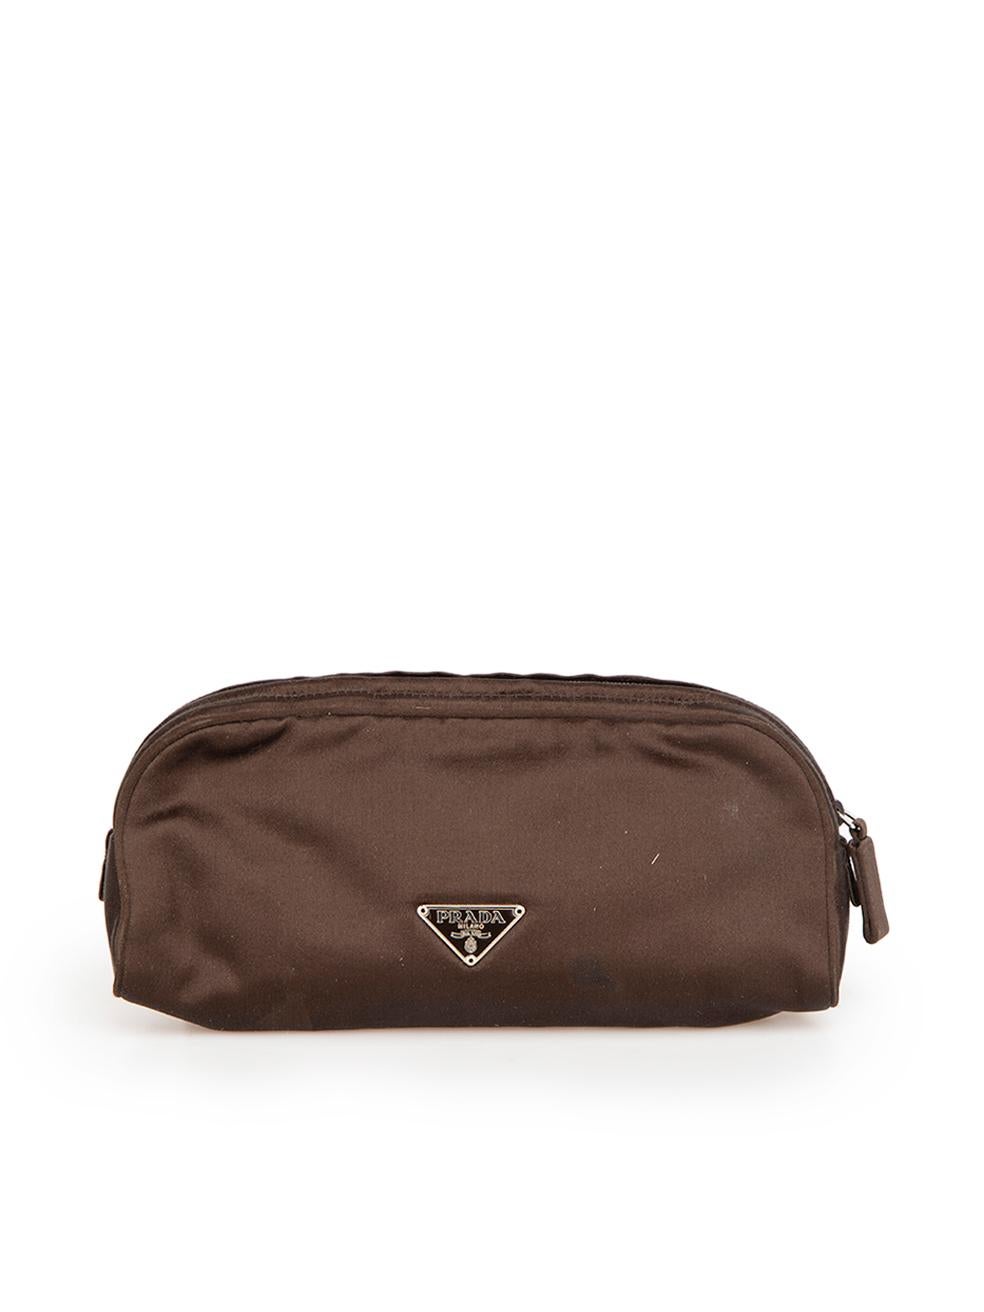 Prada Women's Vintage Brown Satin Embroidered Pouch In Good Condition For Sale In London, GB